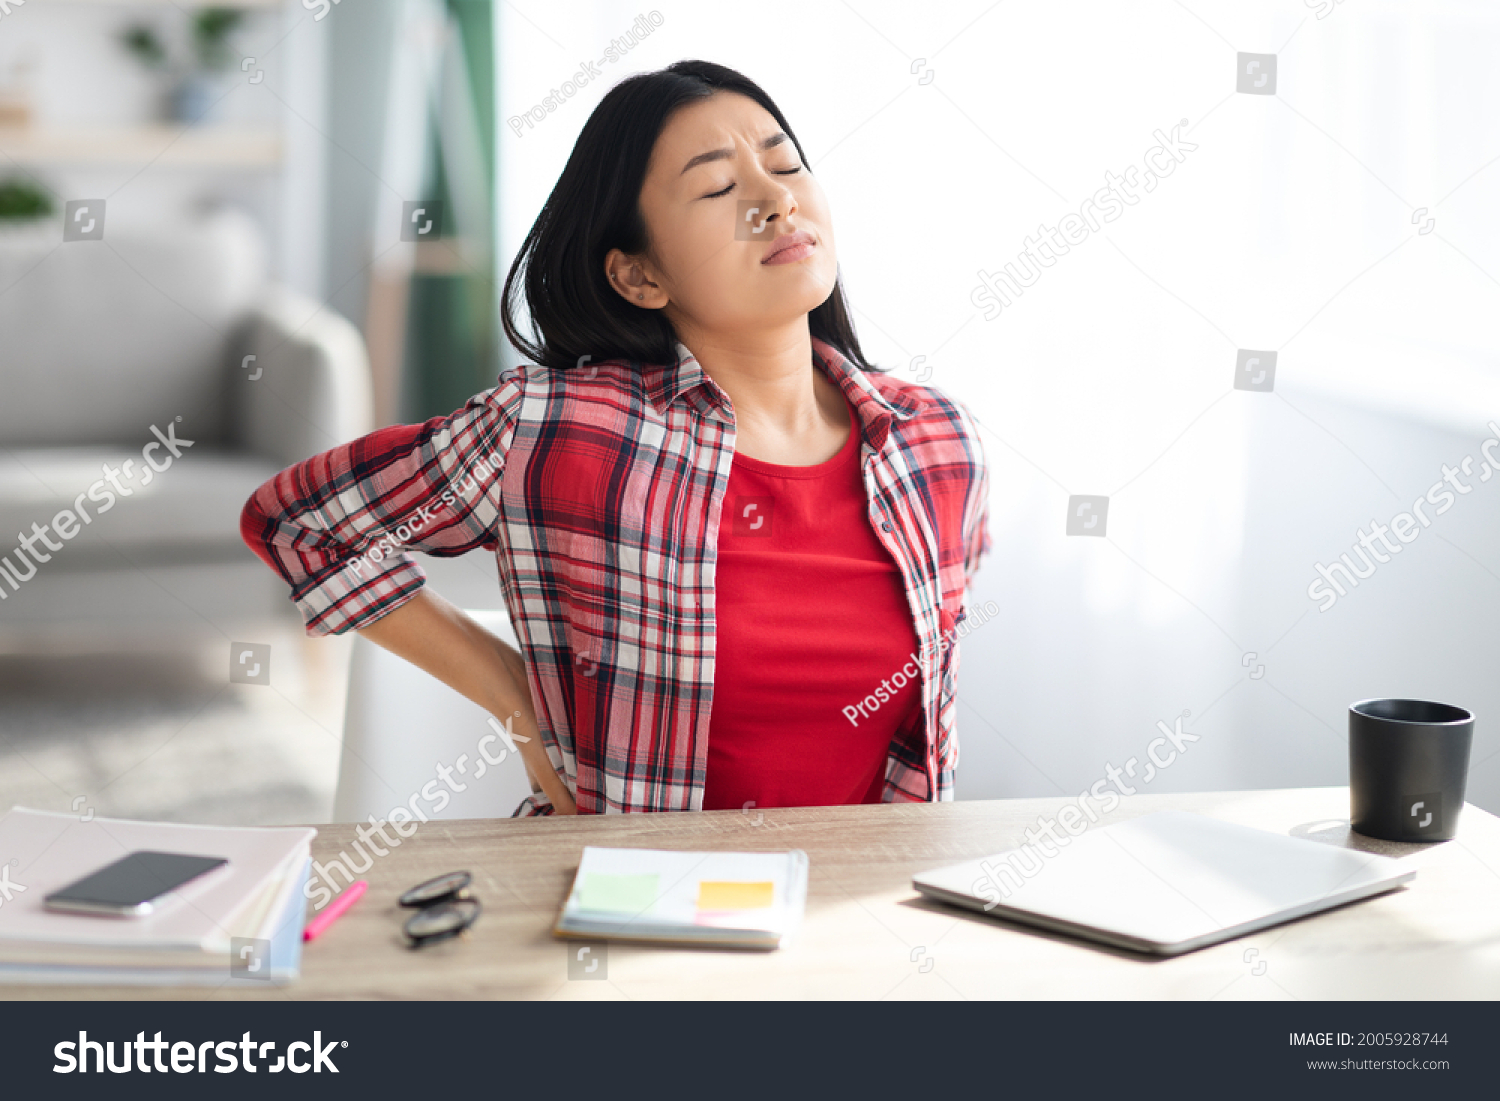 Beautiful Young Asian Woman Suffering From Backache While Sitting At Desk In Home Office, Tired Korean Freelancer Lady Having Acute Lower Back Pain After Long Time Working With Laptop Computer #2005928744